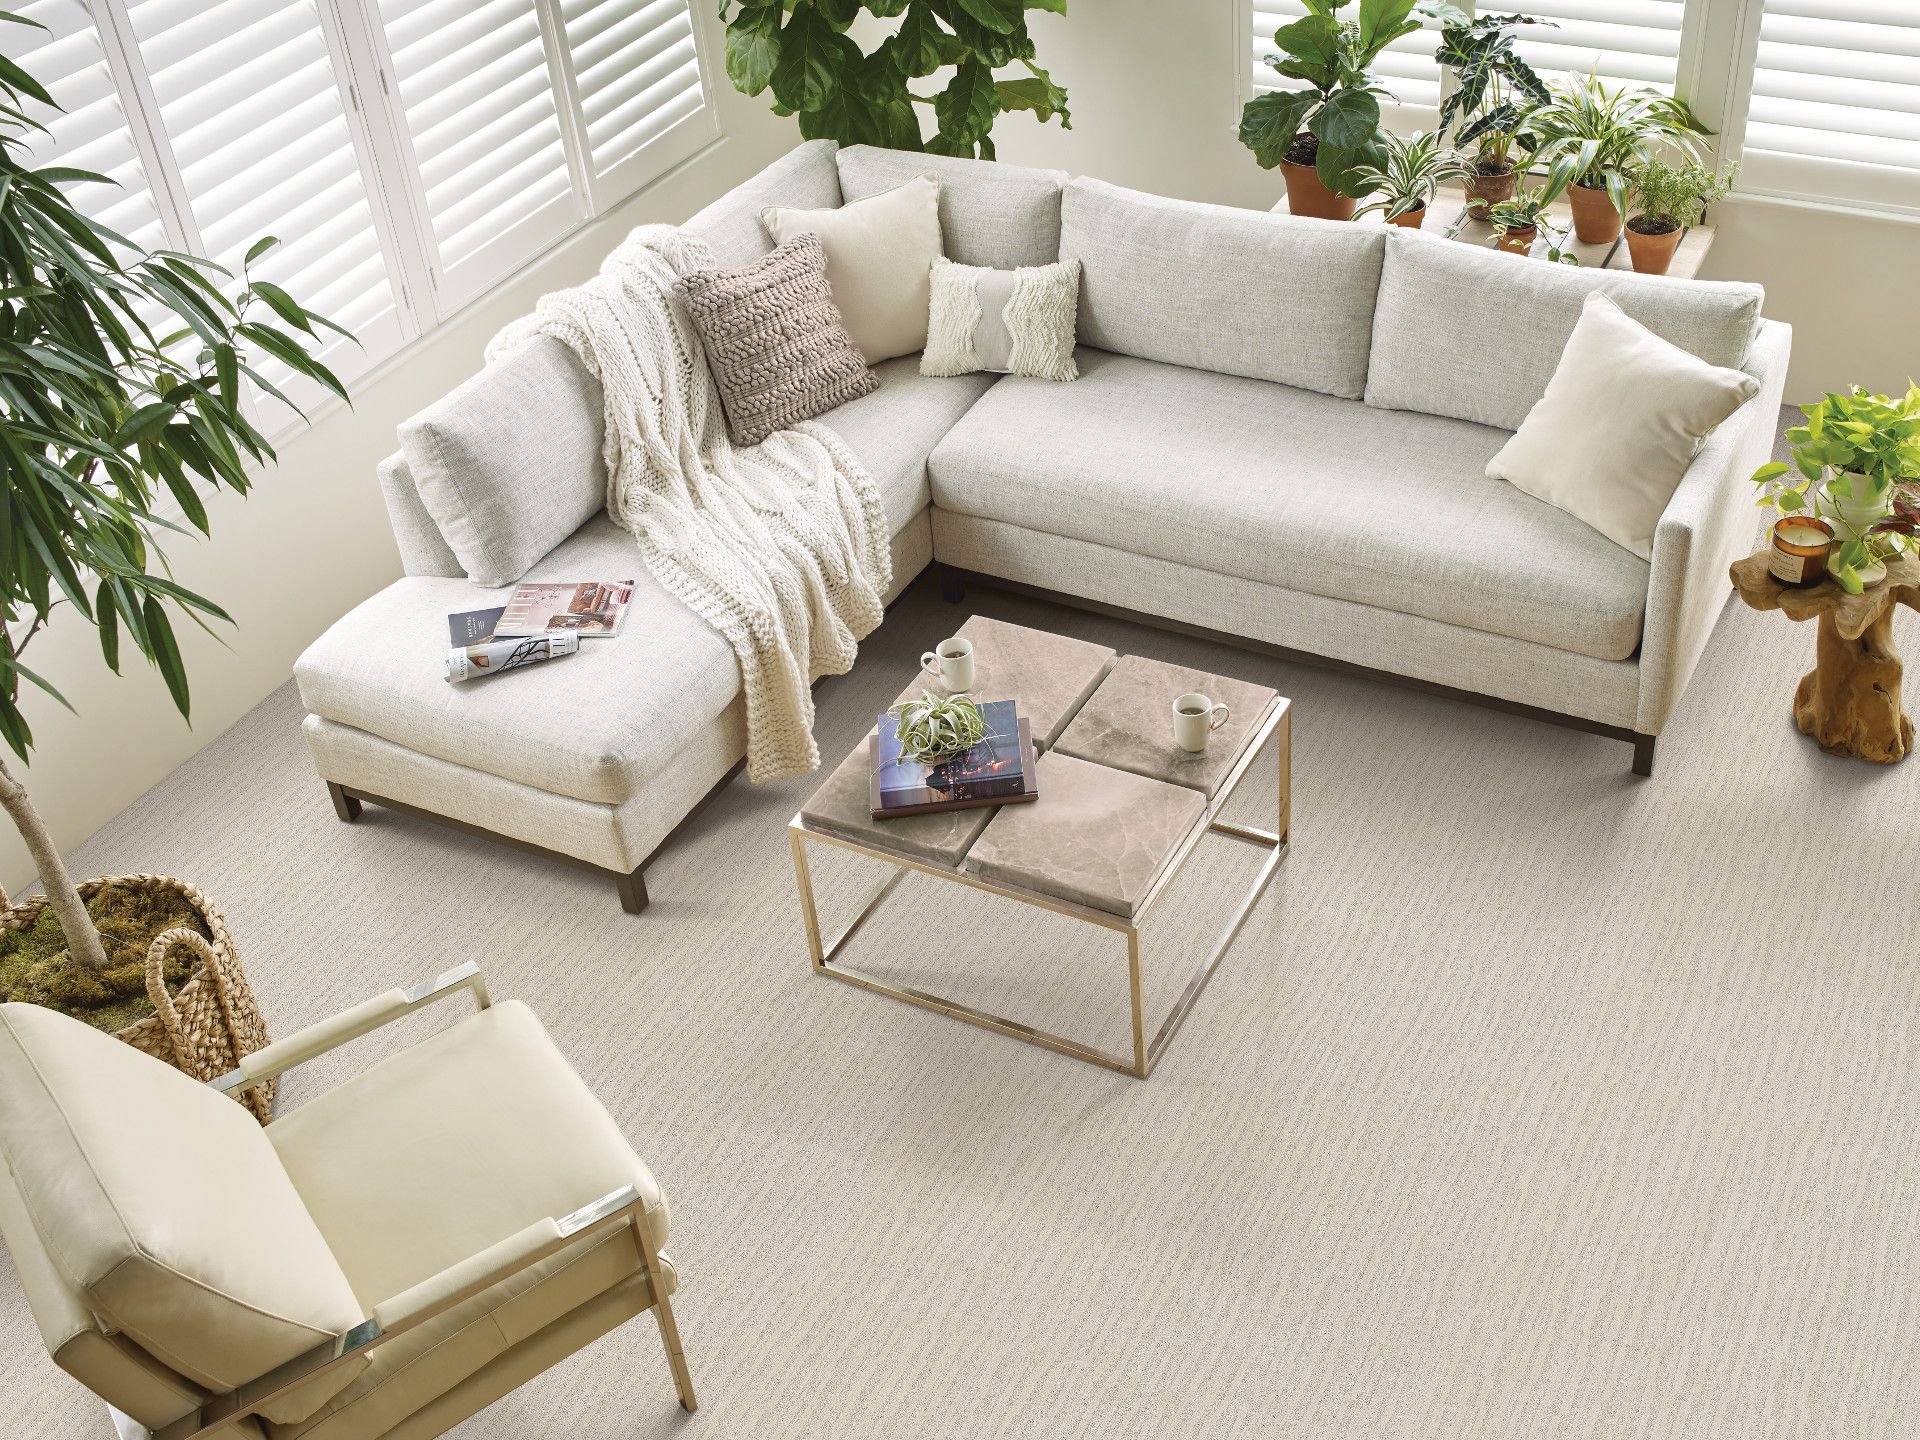 large living room with white couch on carpet - Carpet Plus Flooring LLC